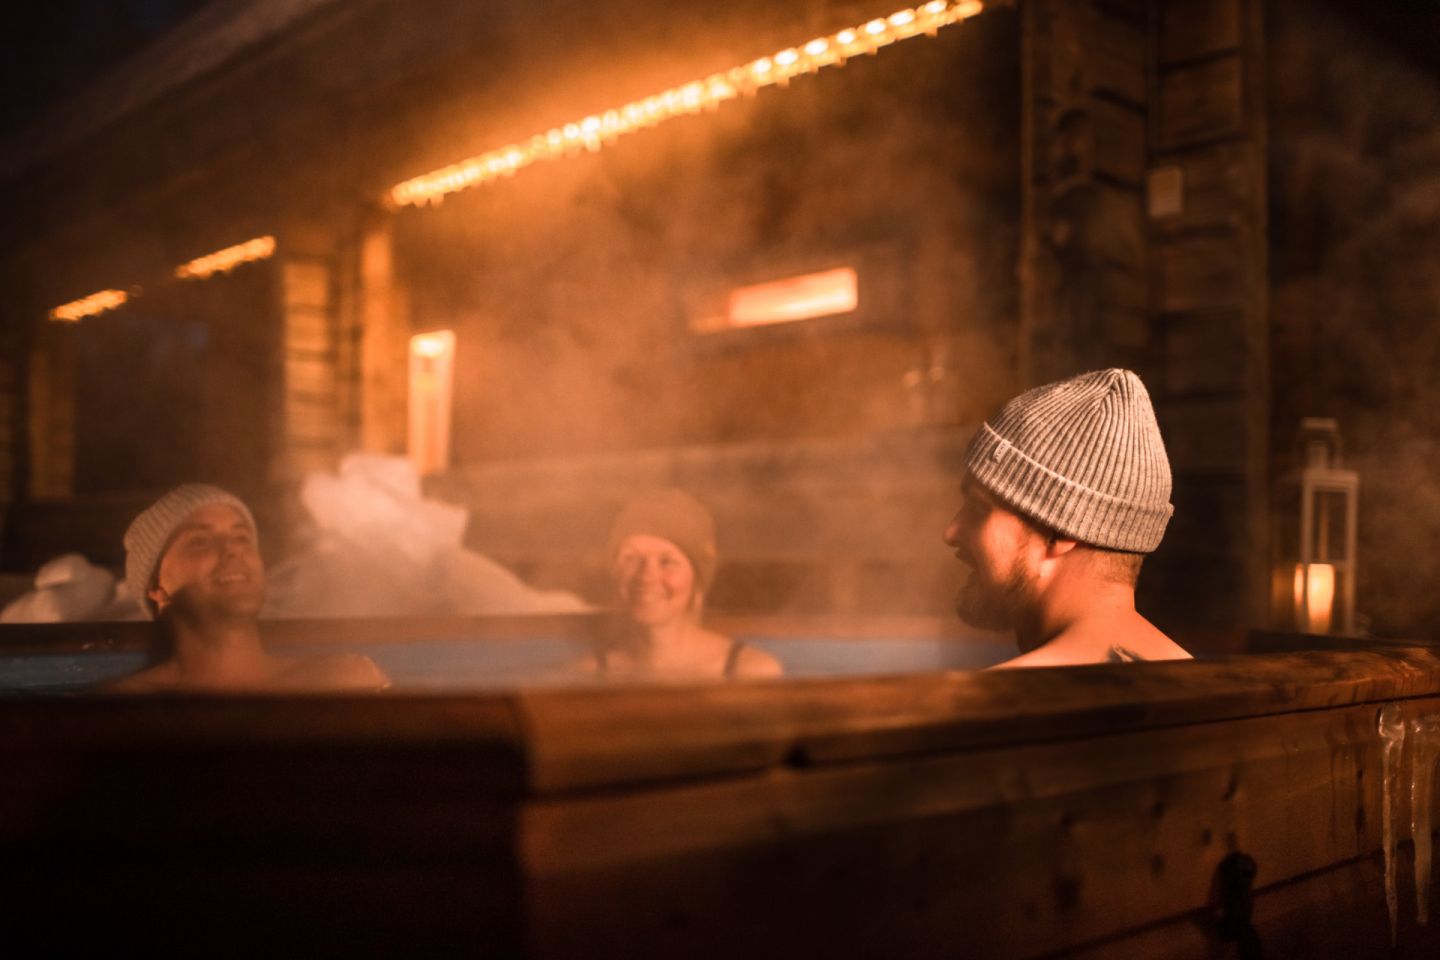 Enjoying a warm hot tub on a cold night at Sunday Morning Resort in Pyhä, Finland